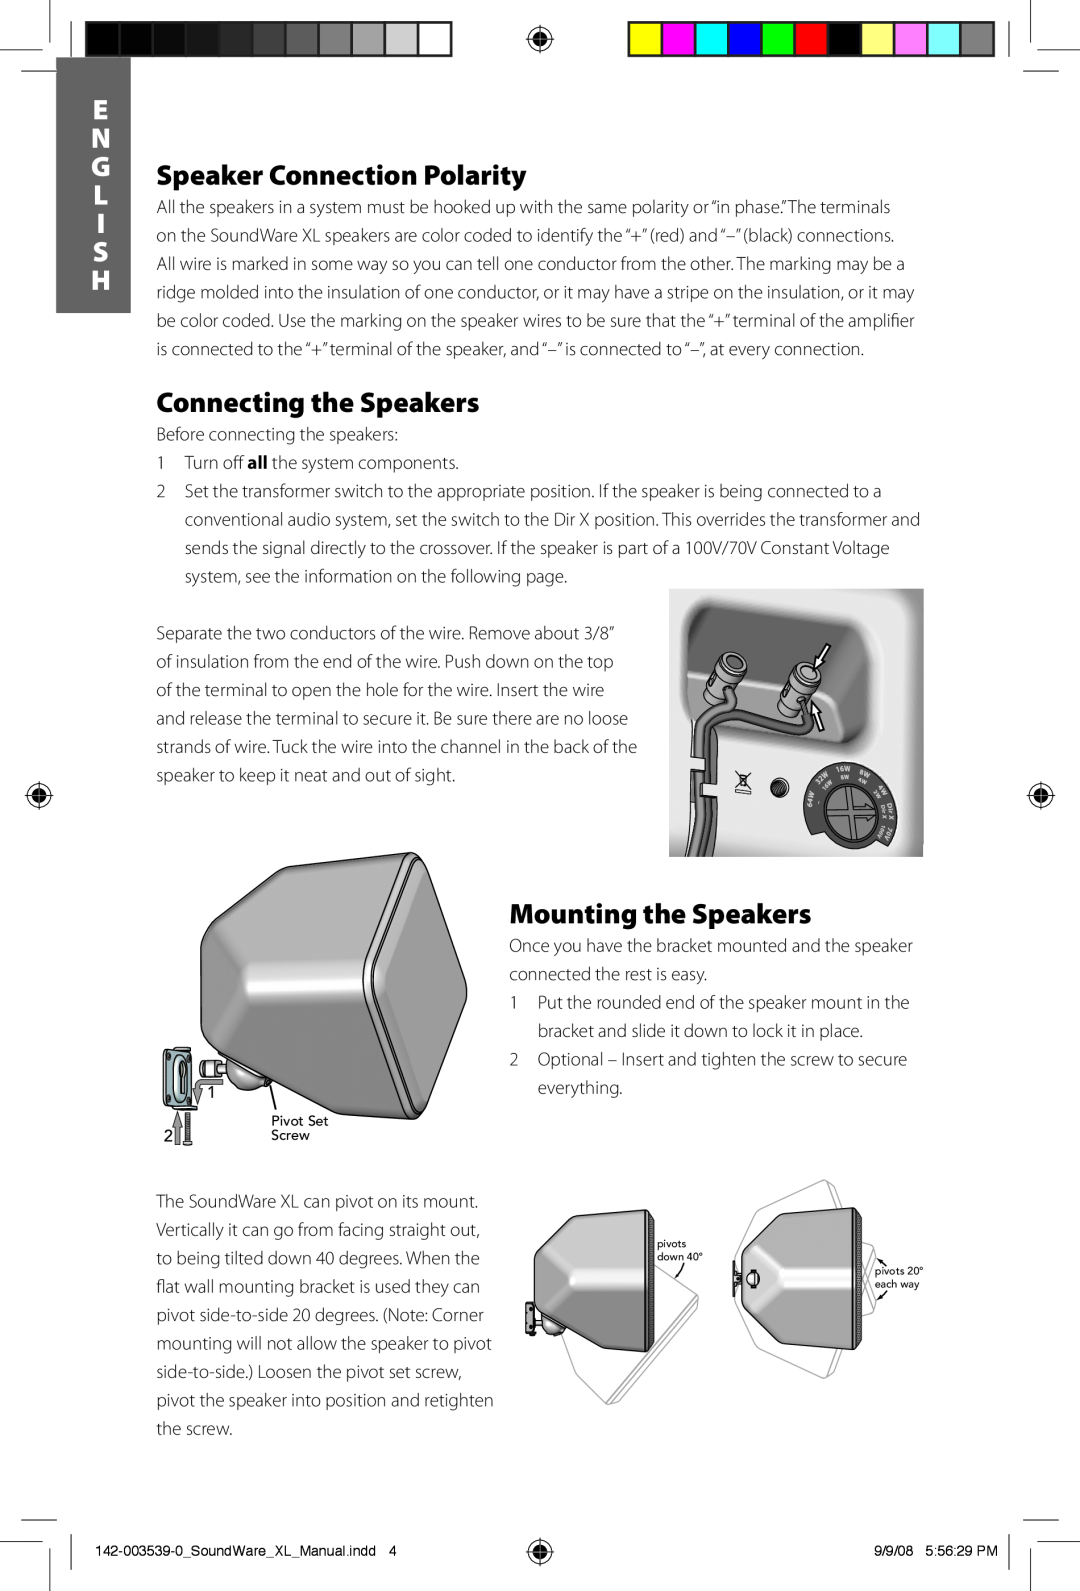 Boston Acoustics SoundWare XL owner manual Speaker Connection Polarity, Connecting the Speakers, Mounting the Speakers 